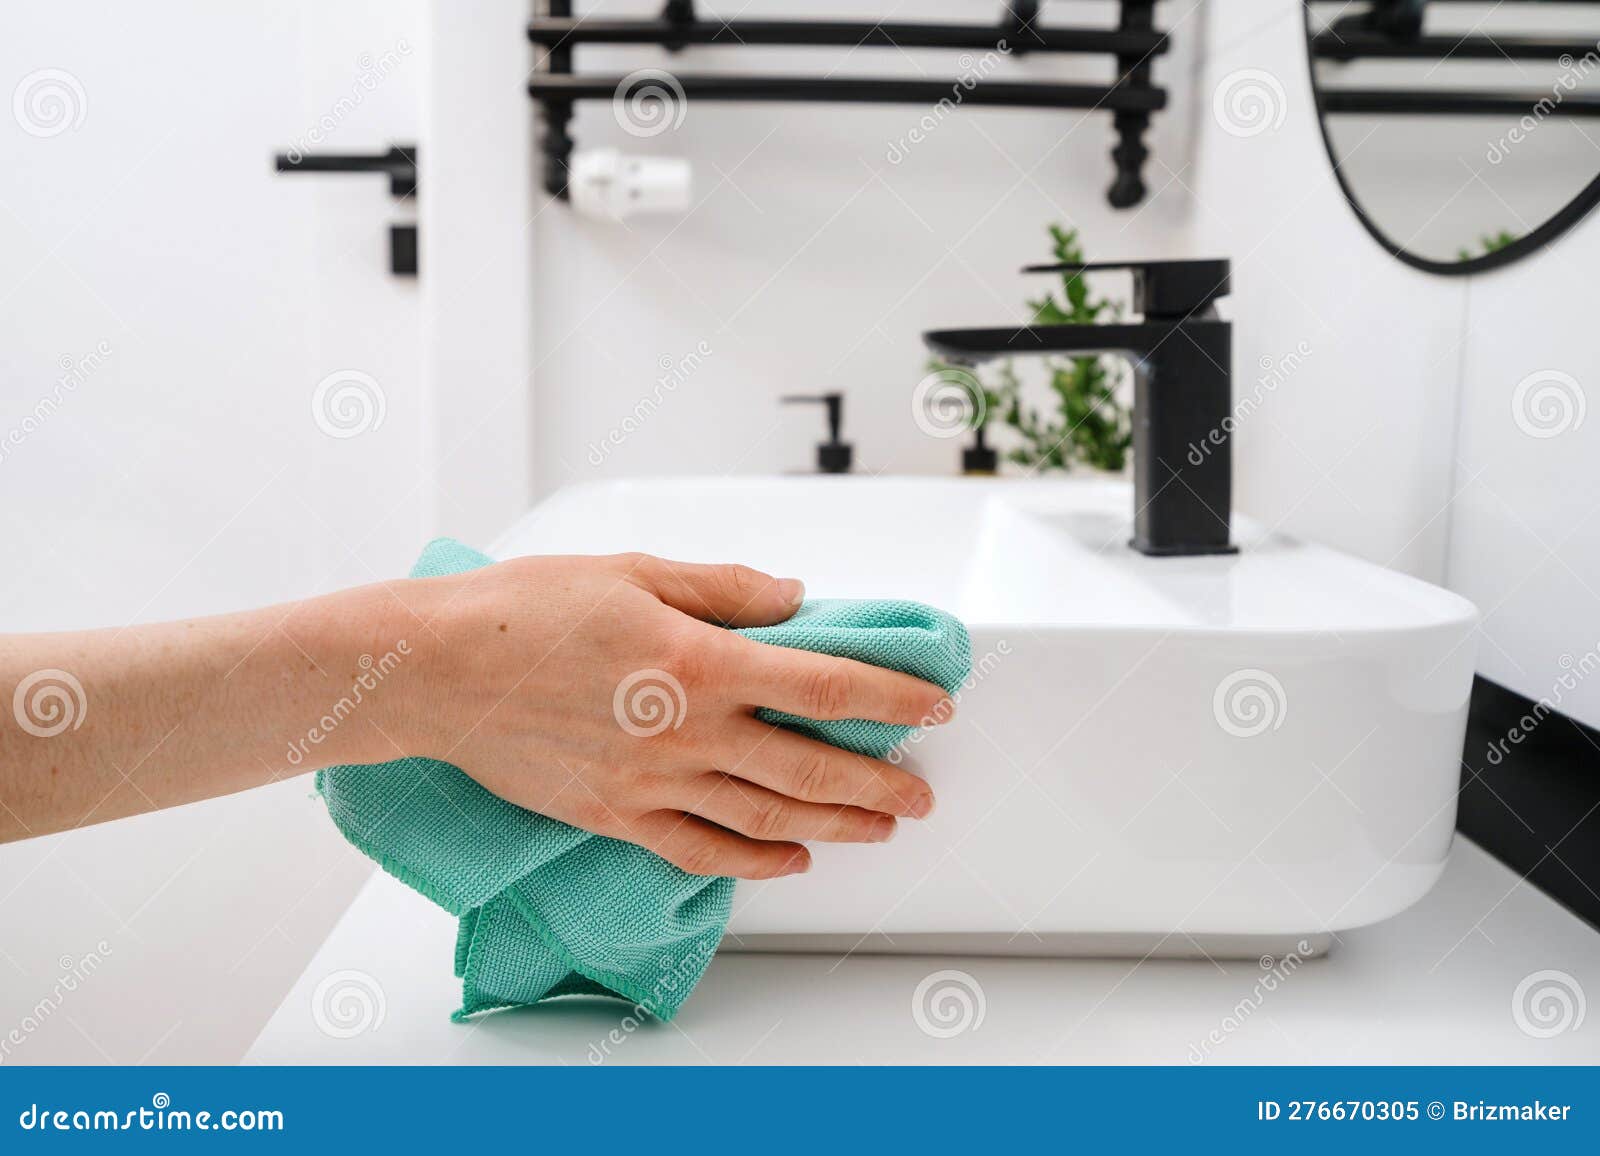 woman cleaning white washbasin with a cloth